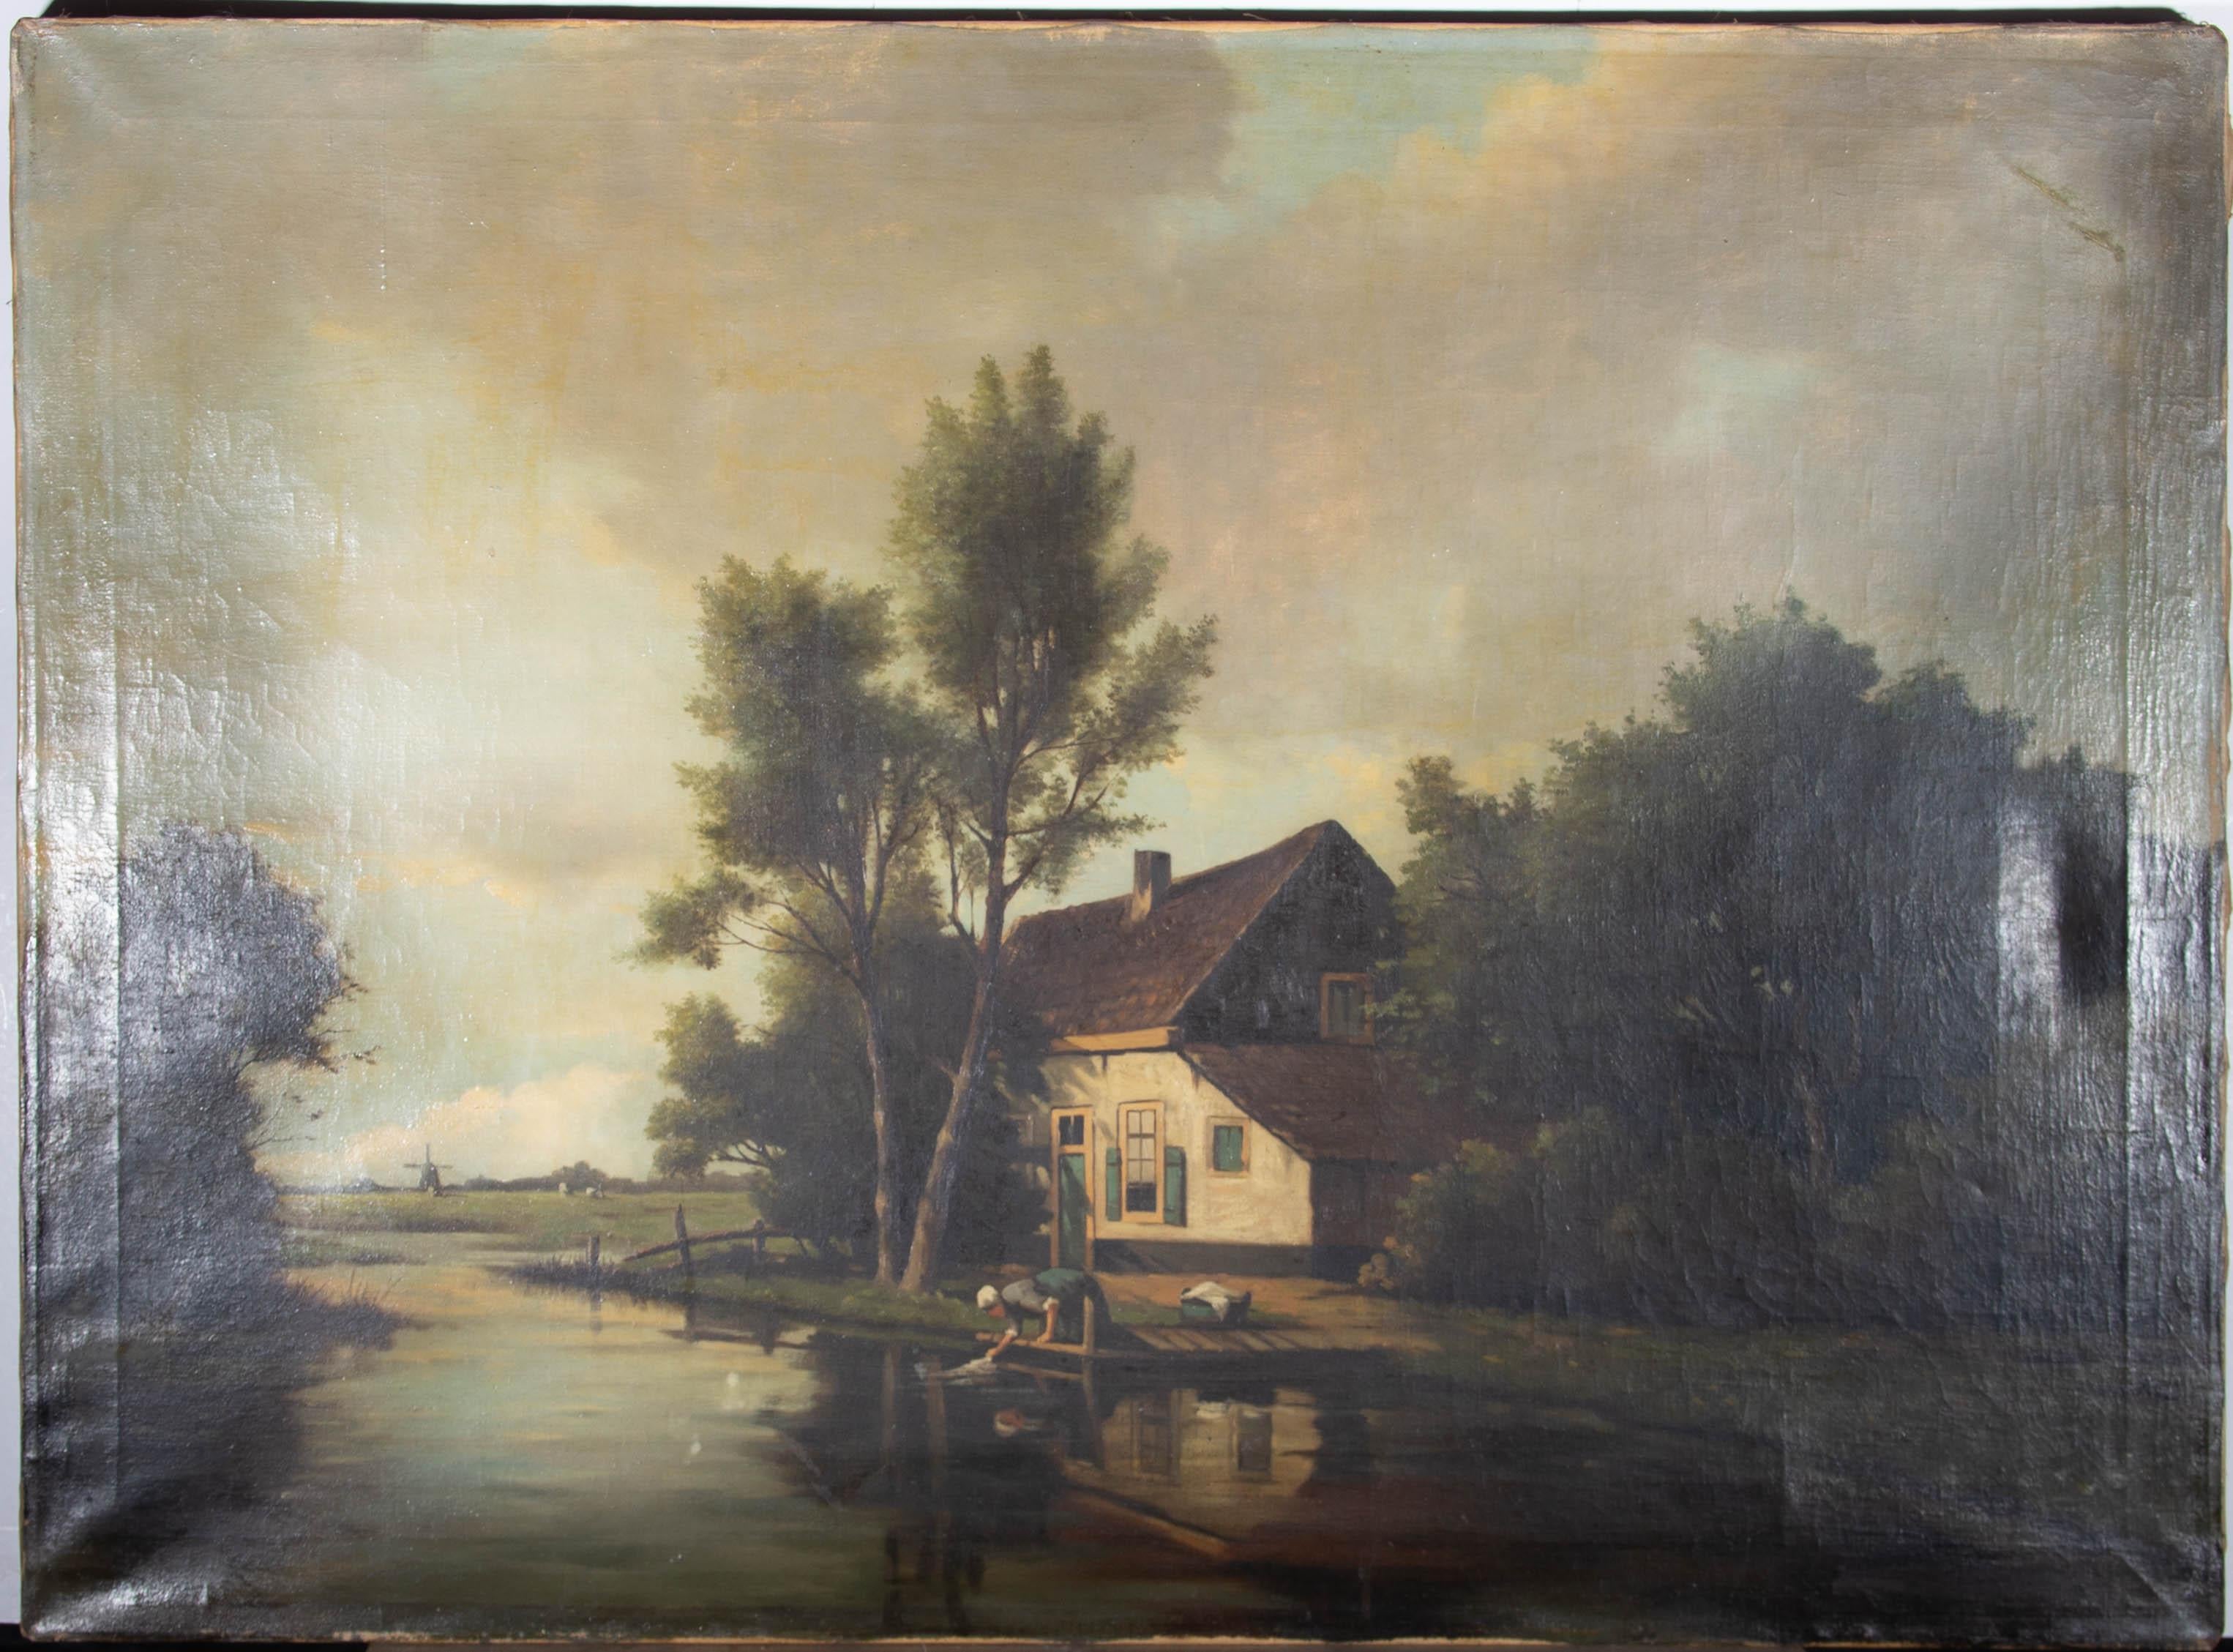 A charming and evocative oil painting by G.H. Tiddens, depicting a rural cottage scene with a figure washing clothes in the river, and a windmill in the distance. Signed to the lower right-hand corner. On canvas on stretchers.
